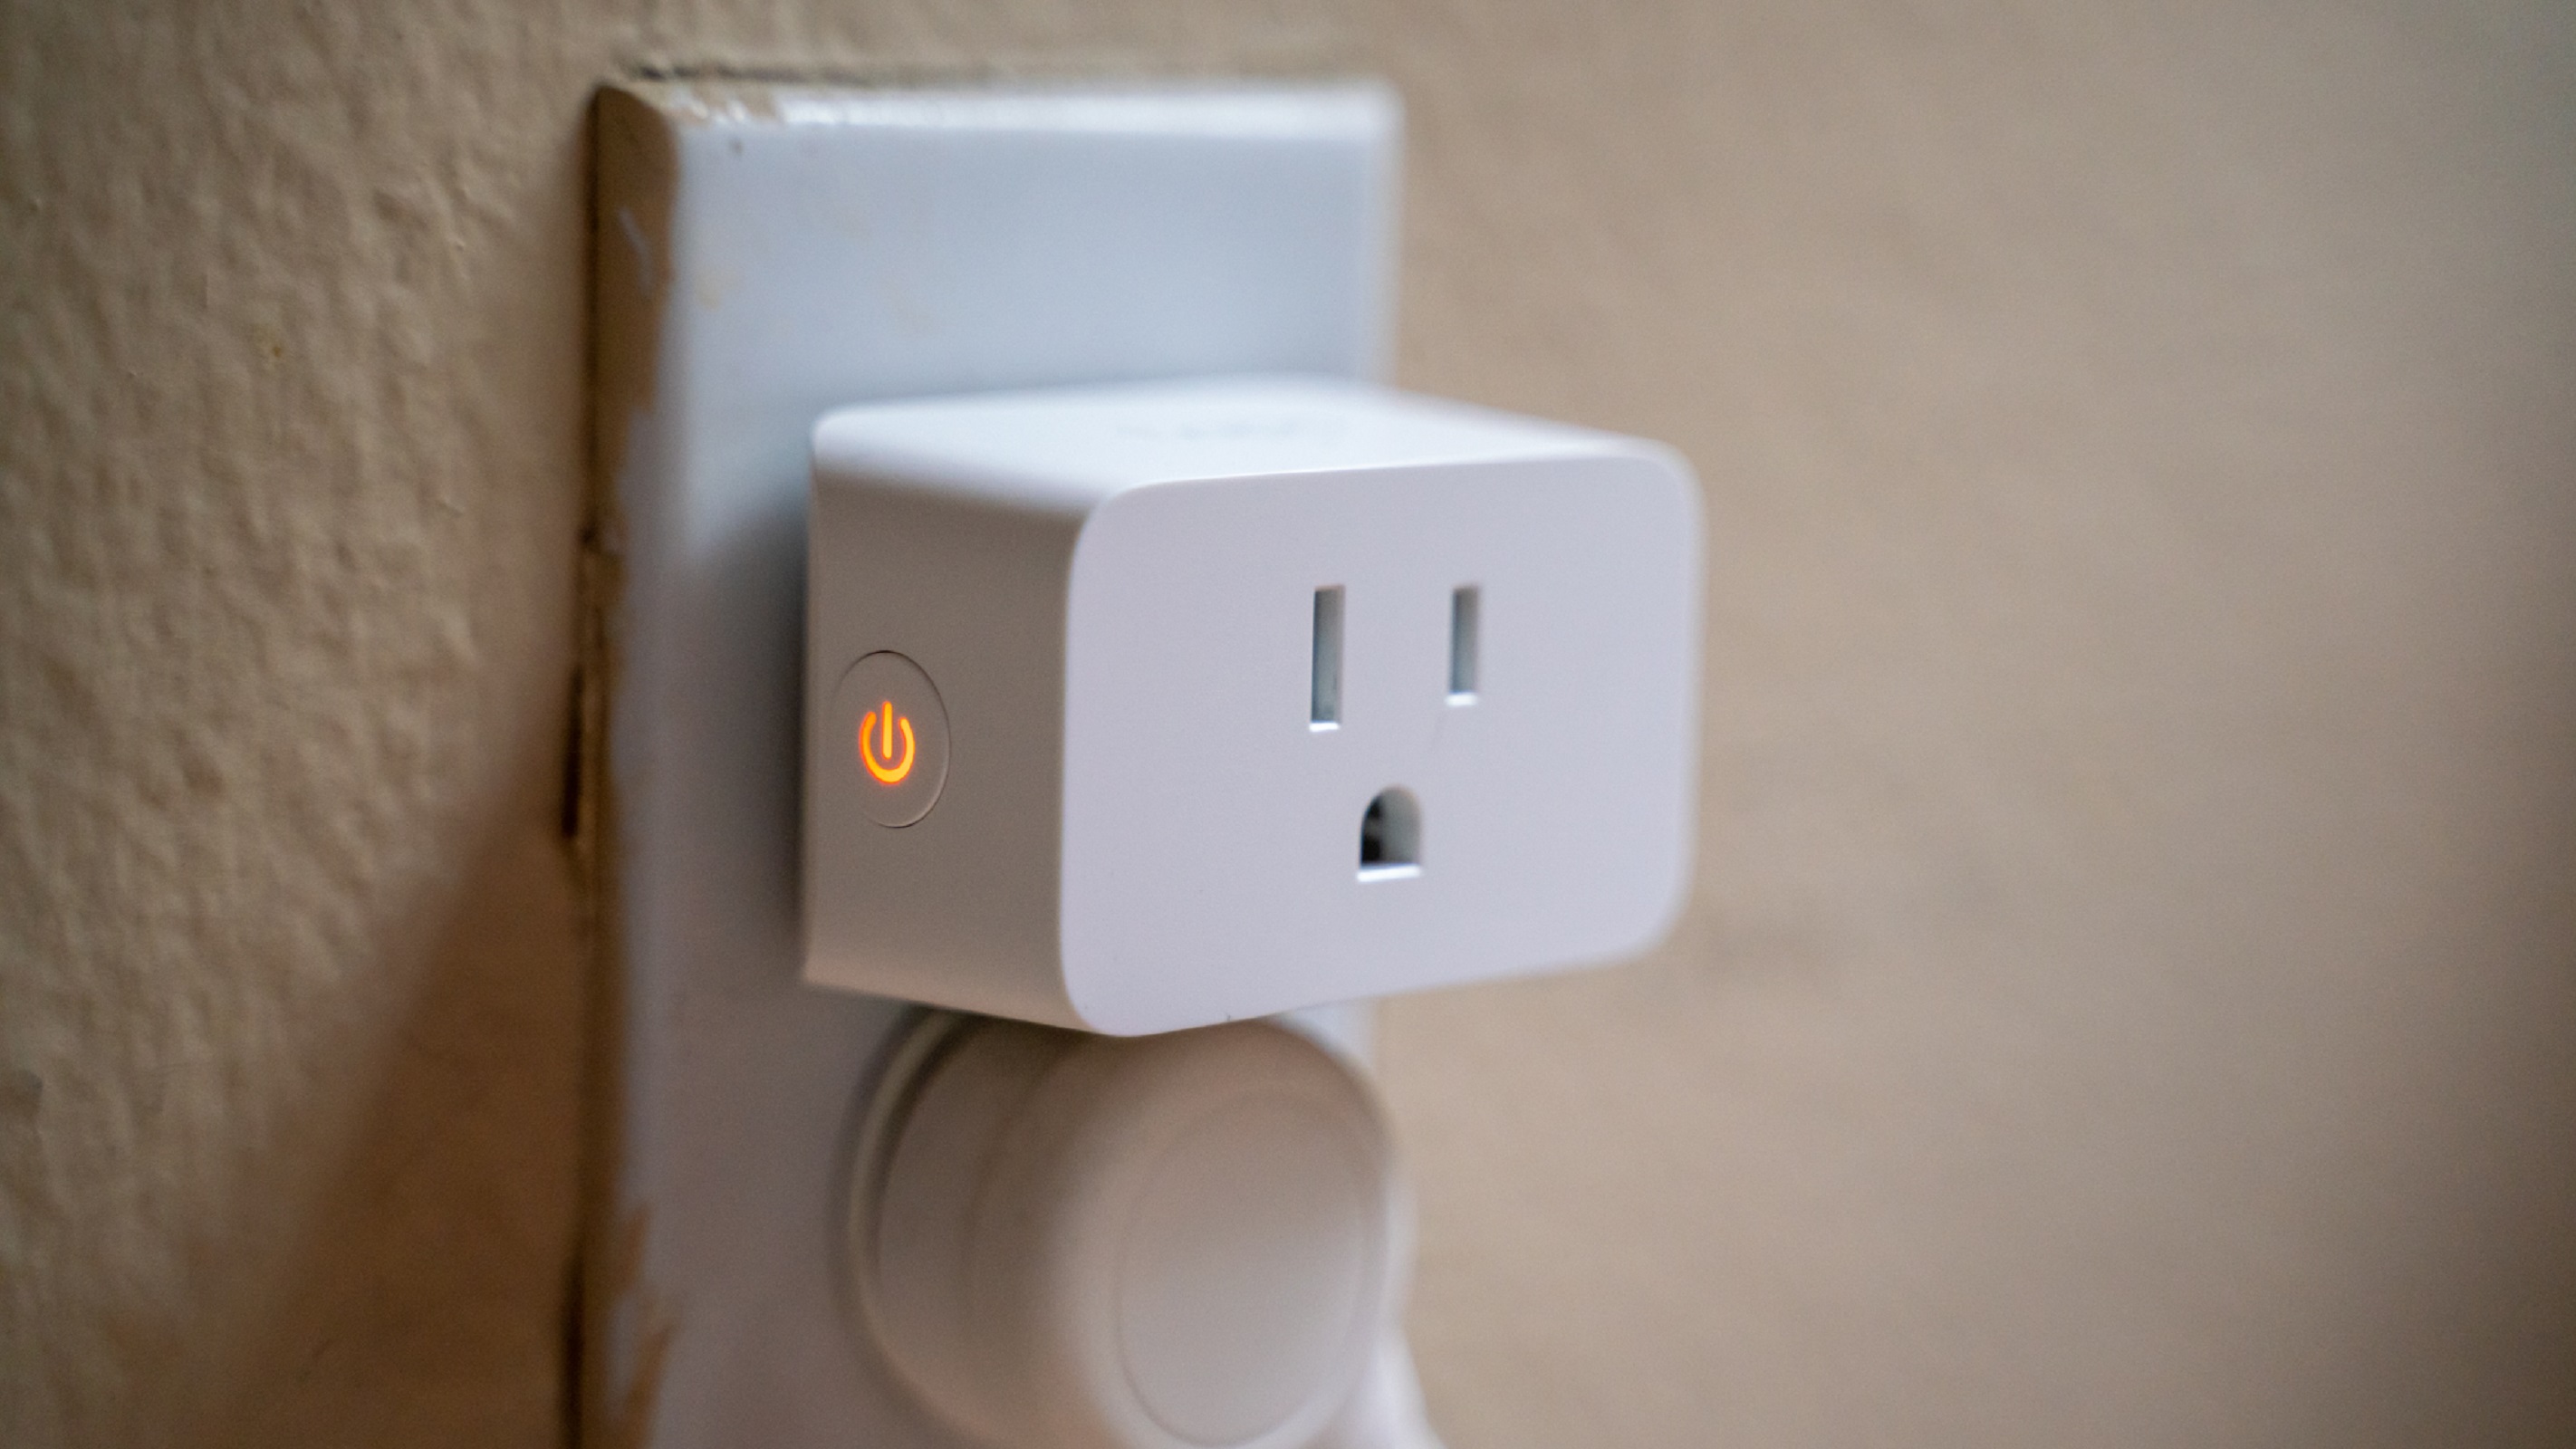 Tapo P125M smart plug with LED button on left hand side